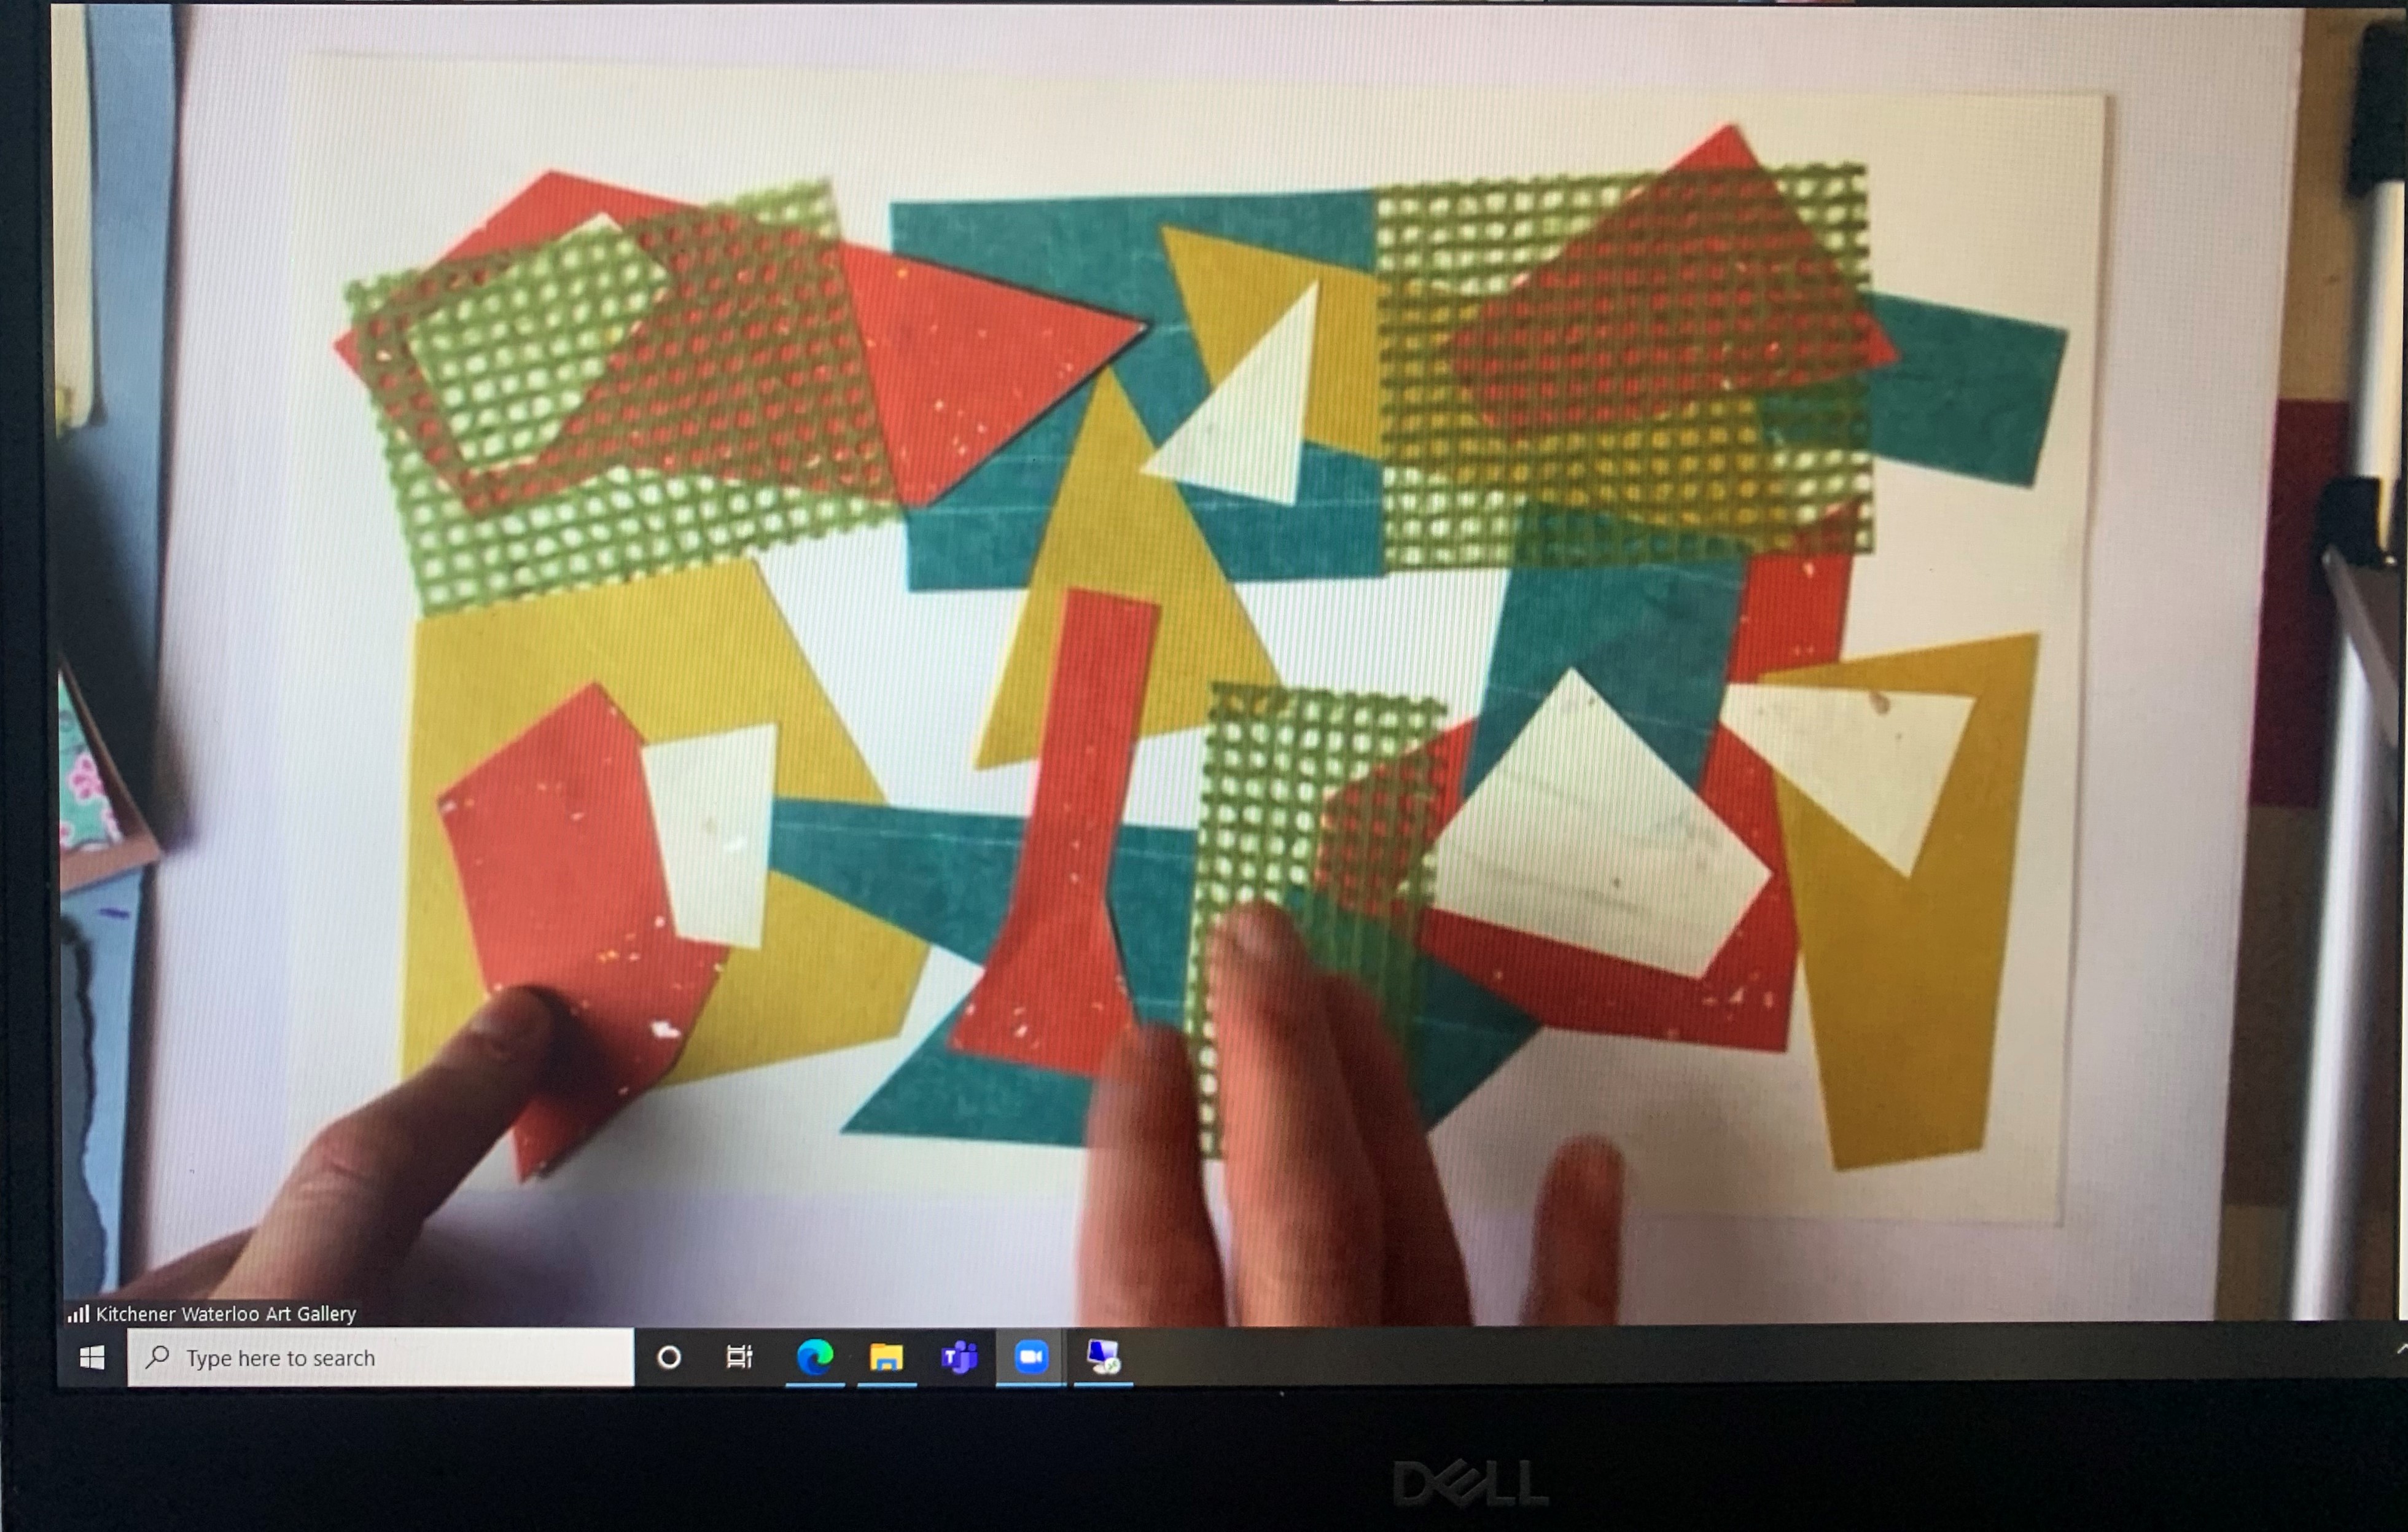 View of a colourful collage in progress with two hands manipulating shapes as seen via a Zoom videoconferencing screen